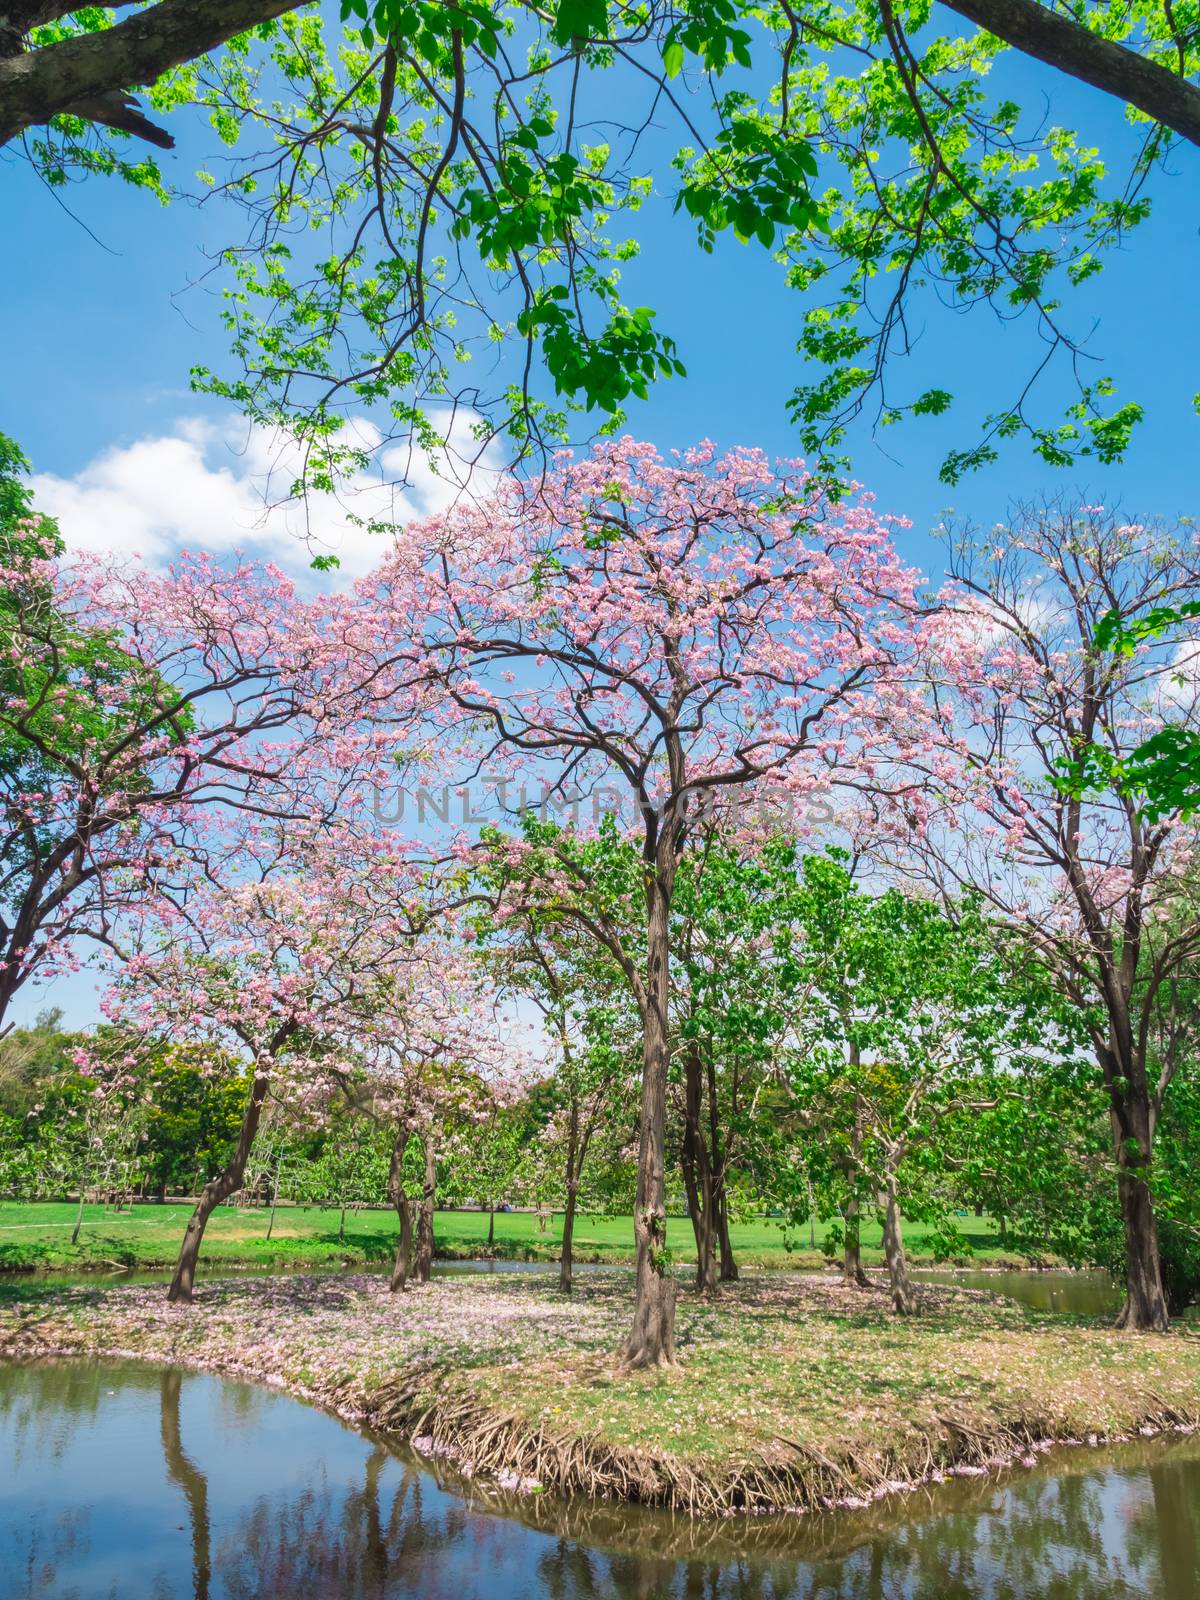 Flowers of pink trumpet trees are blossoming in Public park of Bangkok, Thailand